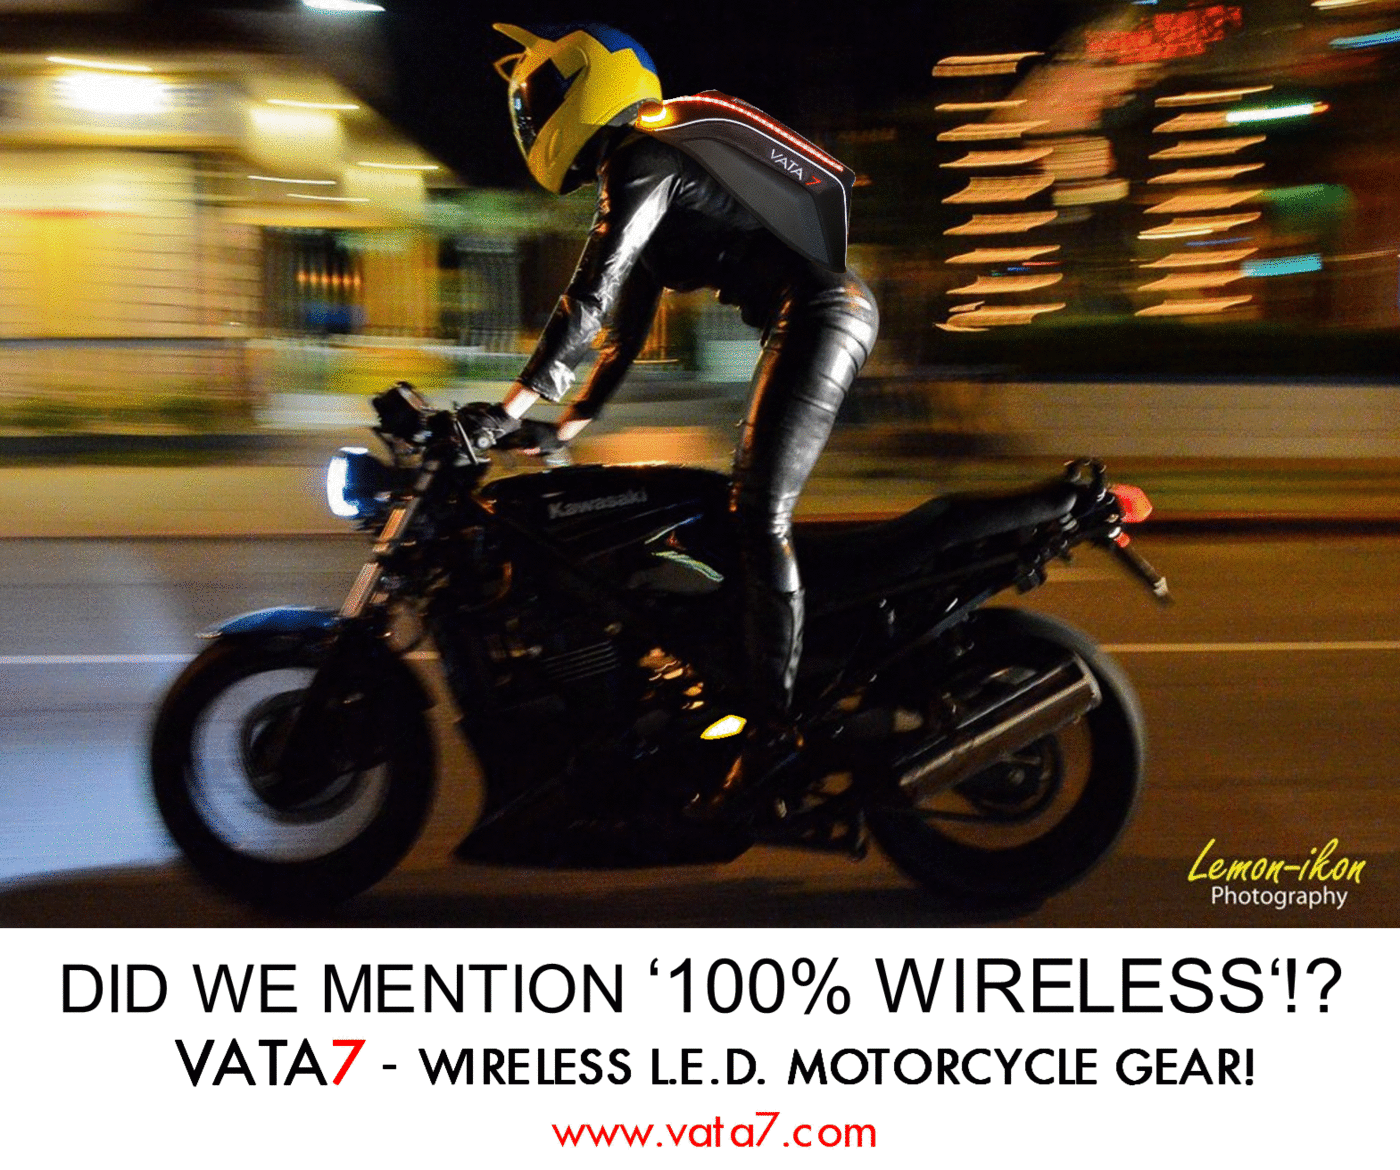 pin by vata7 on vata7 wireless led motorcycle gear pinterest small